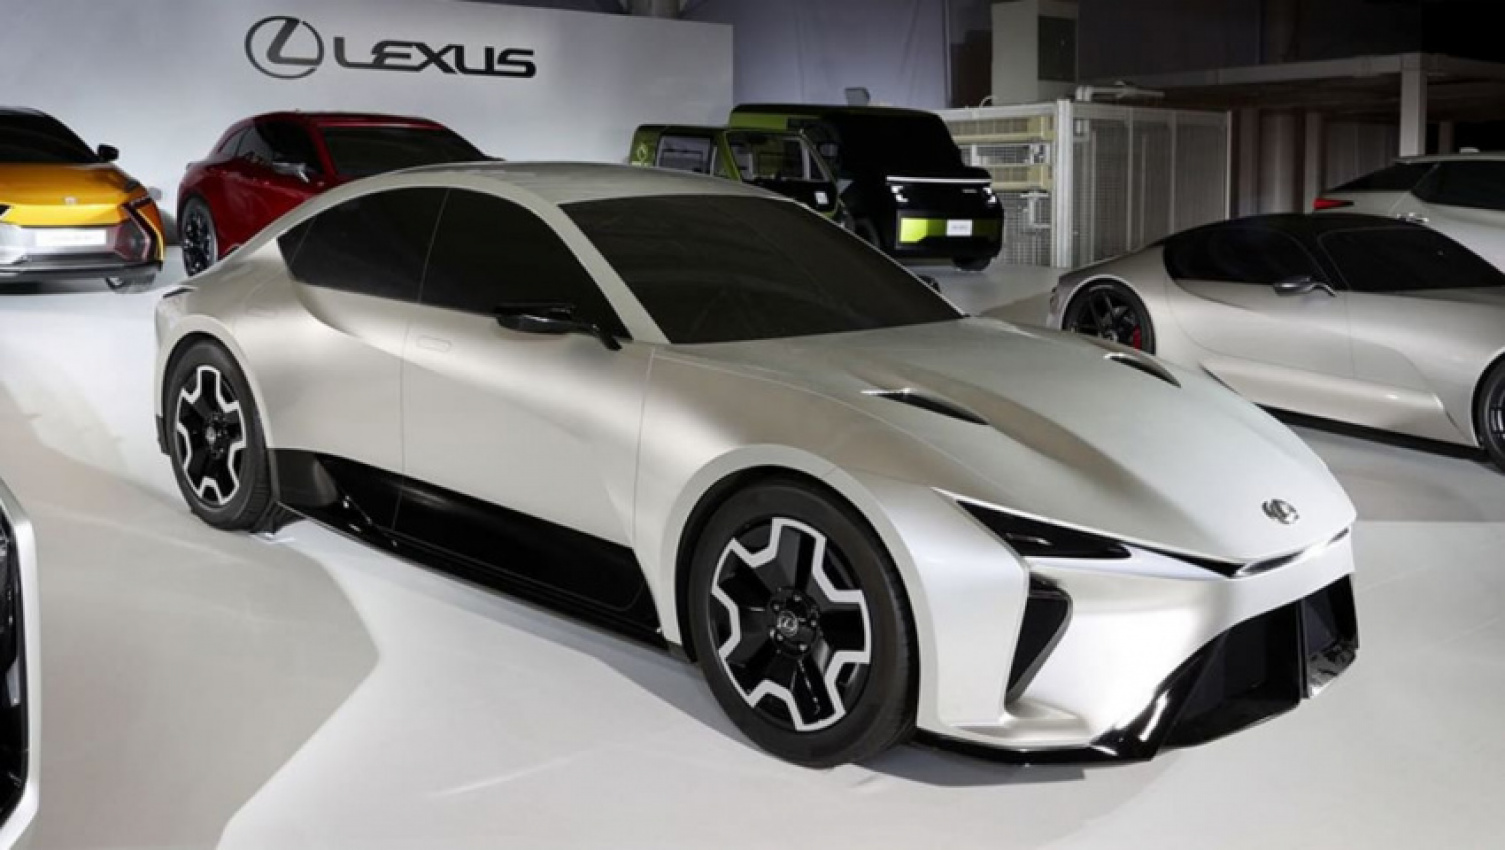 autos, cars, lexus, nissan, tesla, electric, electric cars, family cars, green cars, industry news, lexus is, lexus is 2022, lexus news, lexus sedan range, prestige & luxury cars, tesla model 3, an electric car worth lusting over? coming lexus is replacement could be like the lovechild of a nissan skyline gt-s and tesla model 3